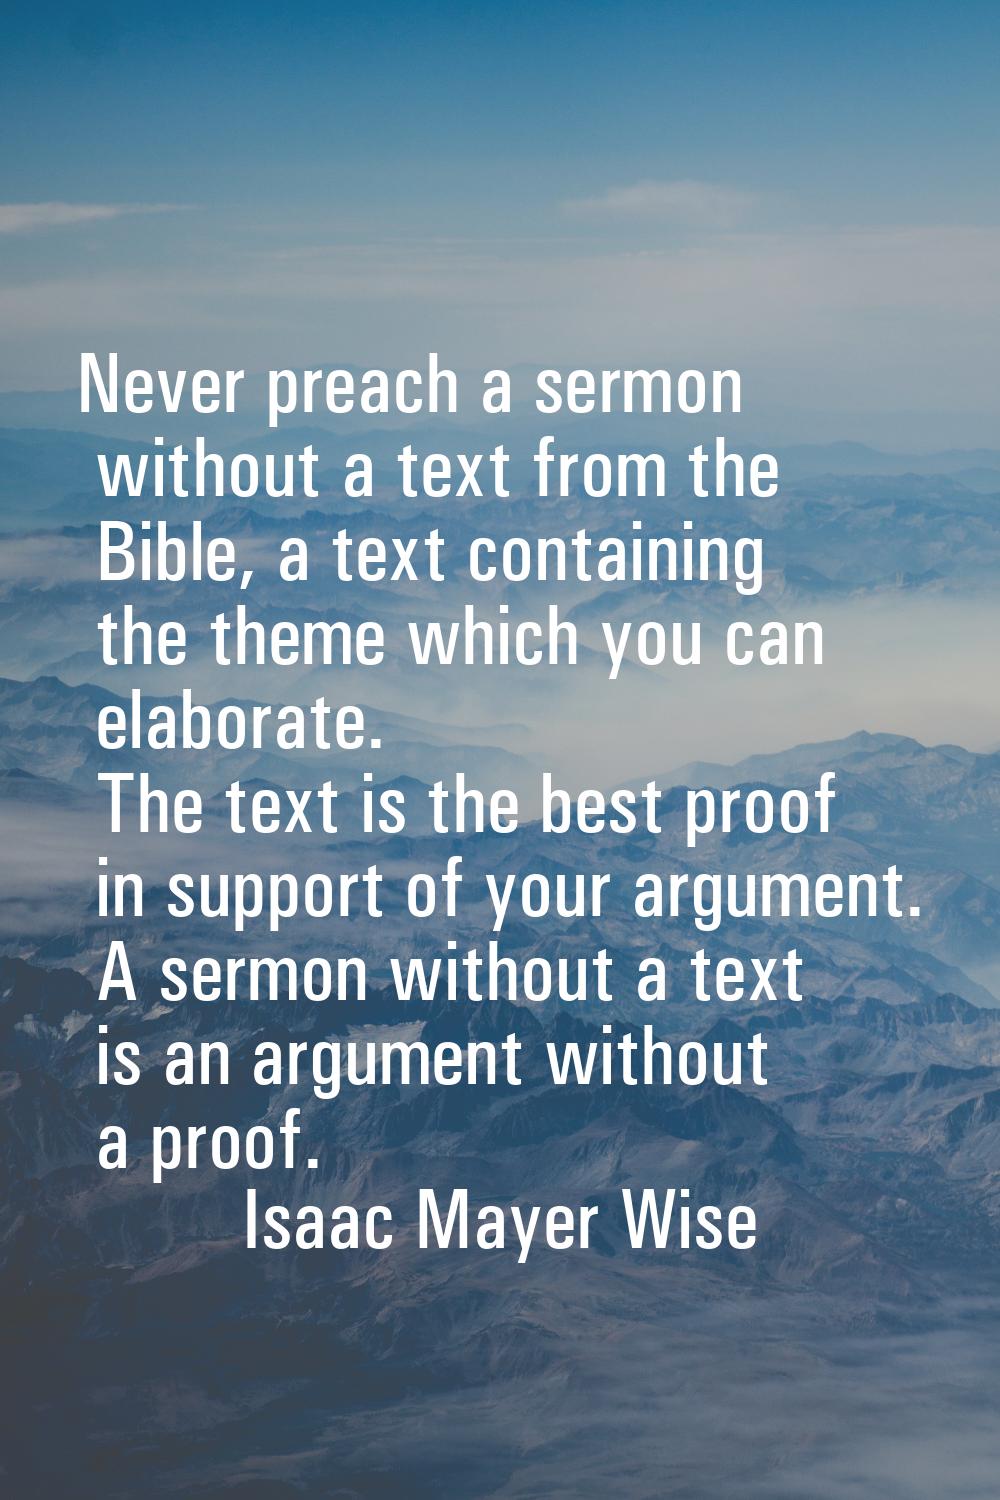 Never preach a sermon without a text from the Bible, a text containing the theme which you can elab